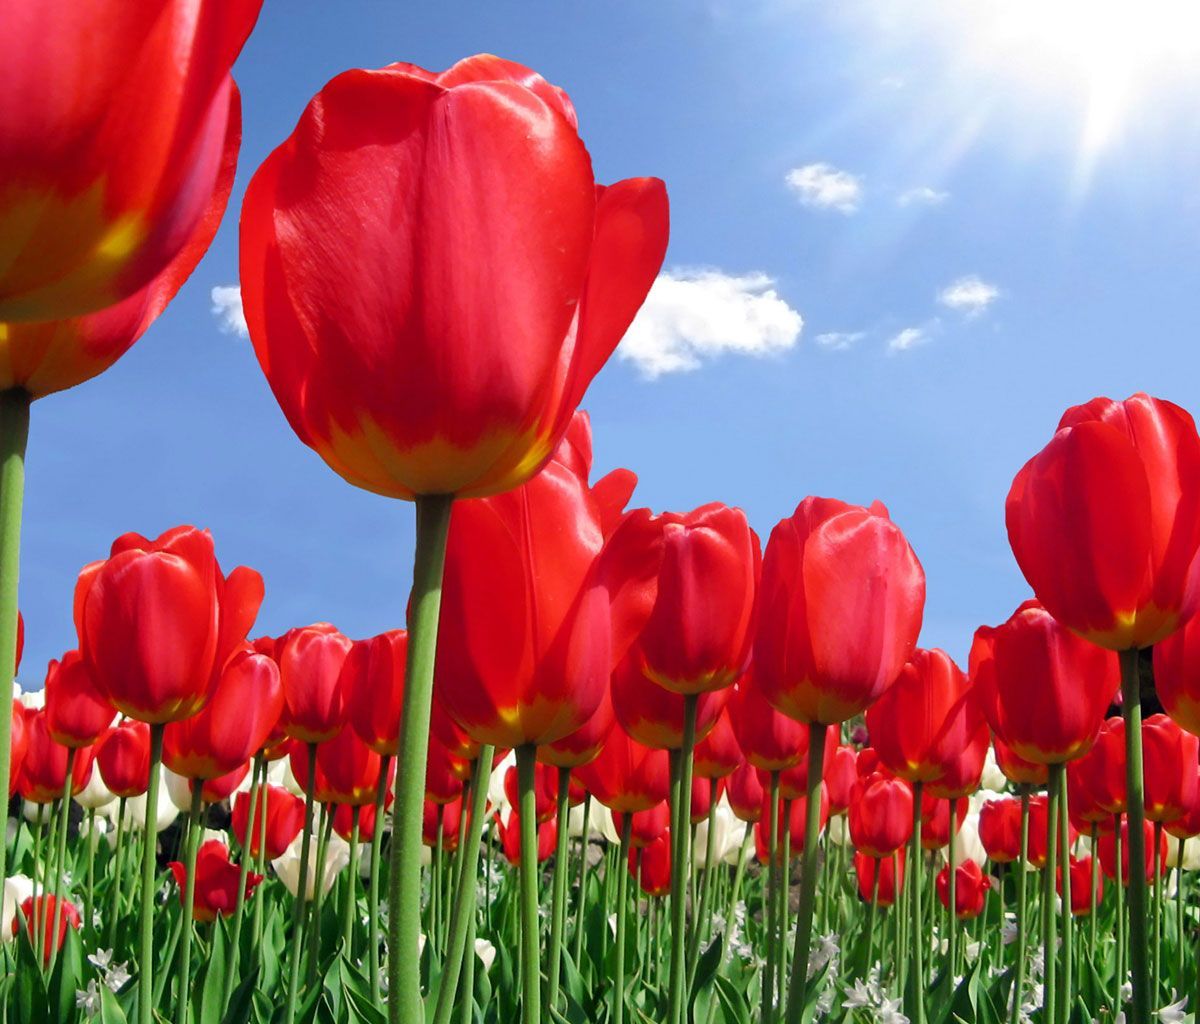 Flower Background for Android Tablets 07 | Tablet Wallpapers ...